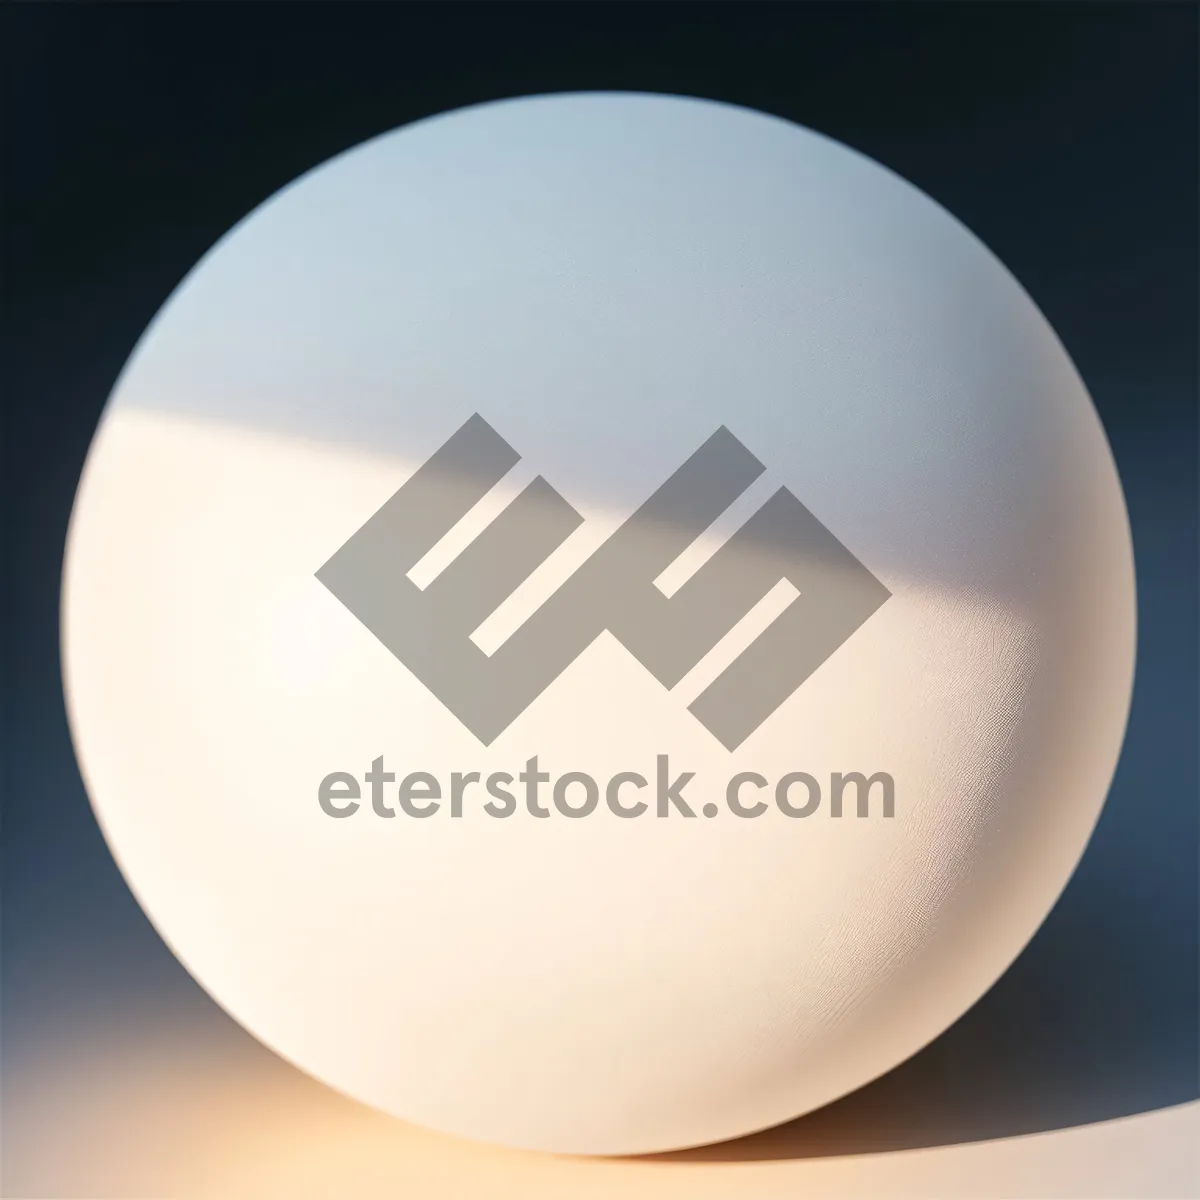 Picture of Shiny Glass Satellite Icon with Round Sphere Design